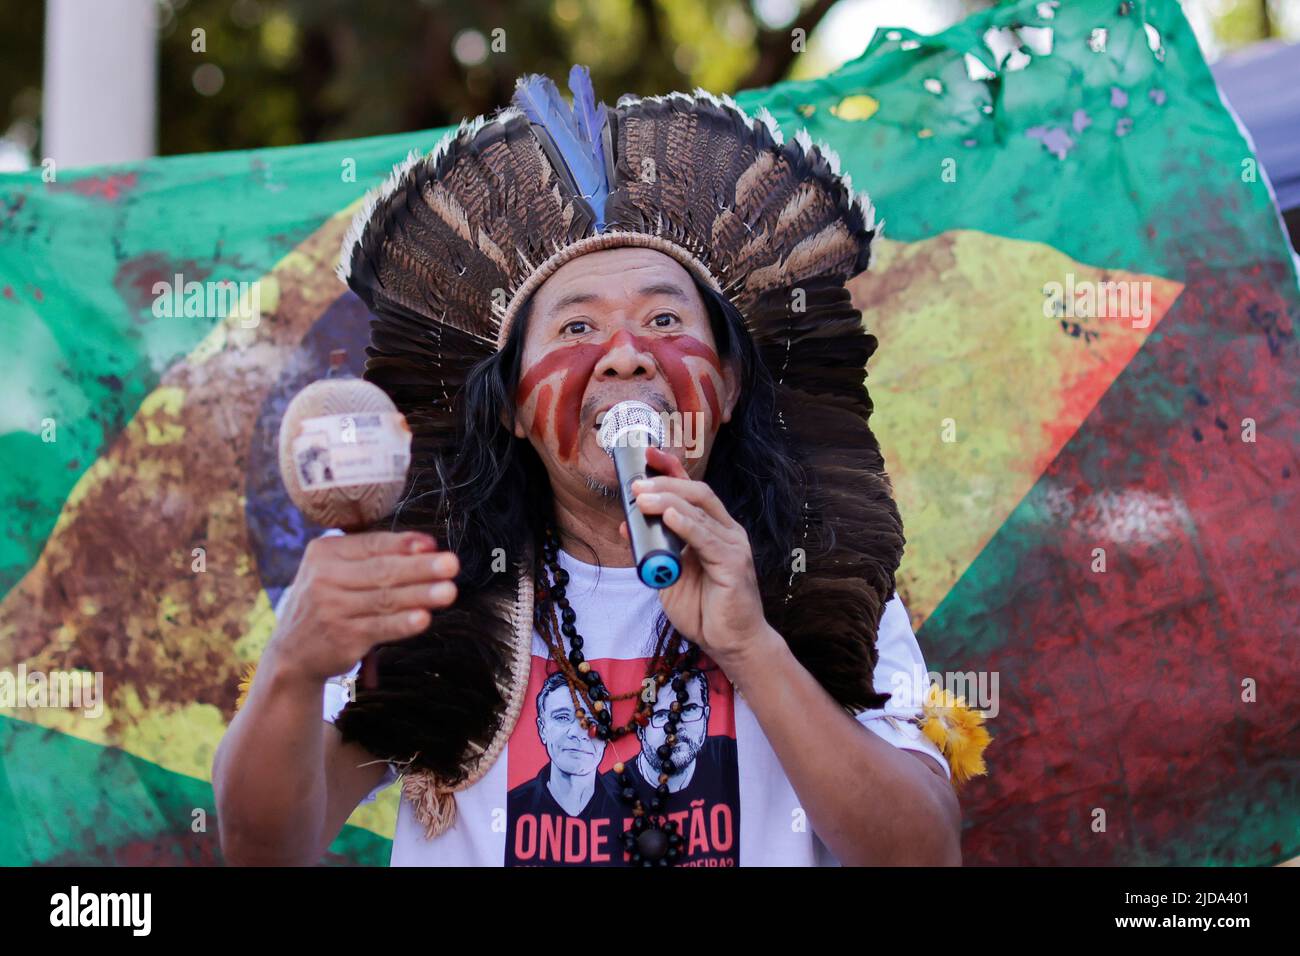 Kamuu Dan Wapichana, from the Wapichana tribe speaks during a protest, to demand justice for journalist Dom Phillips and indigenous expert Bruno Pereira, who were murdered in the Amazon, in Brasilia, Brazil June 19, 2022. REUTERS/Ueslei Marcelino Stock Photo